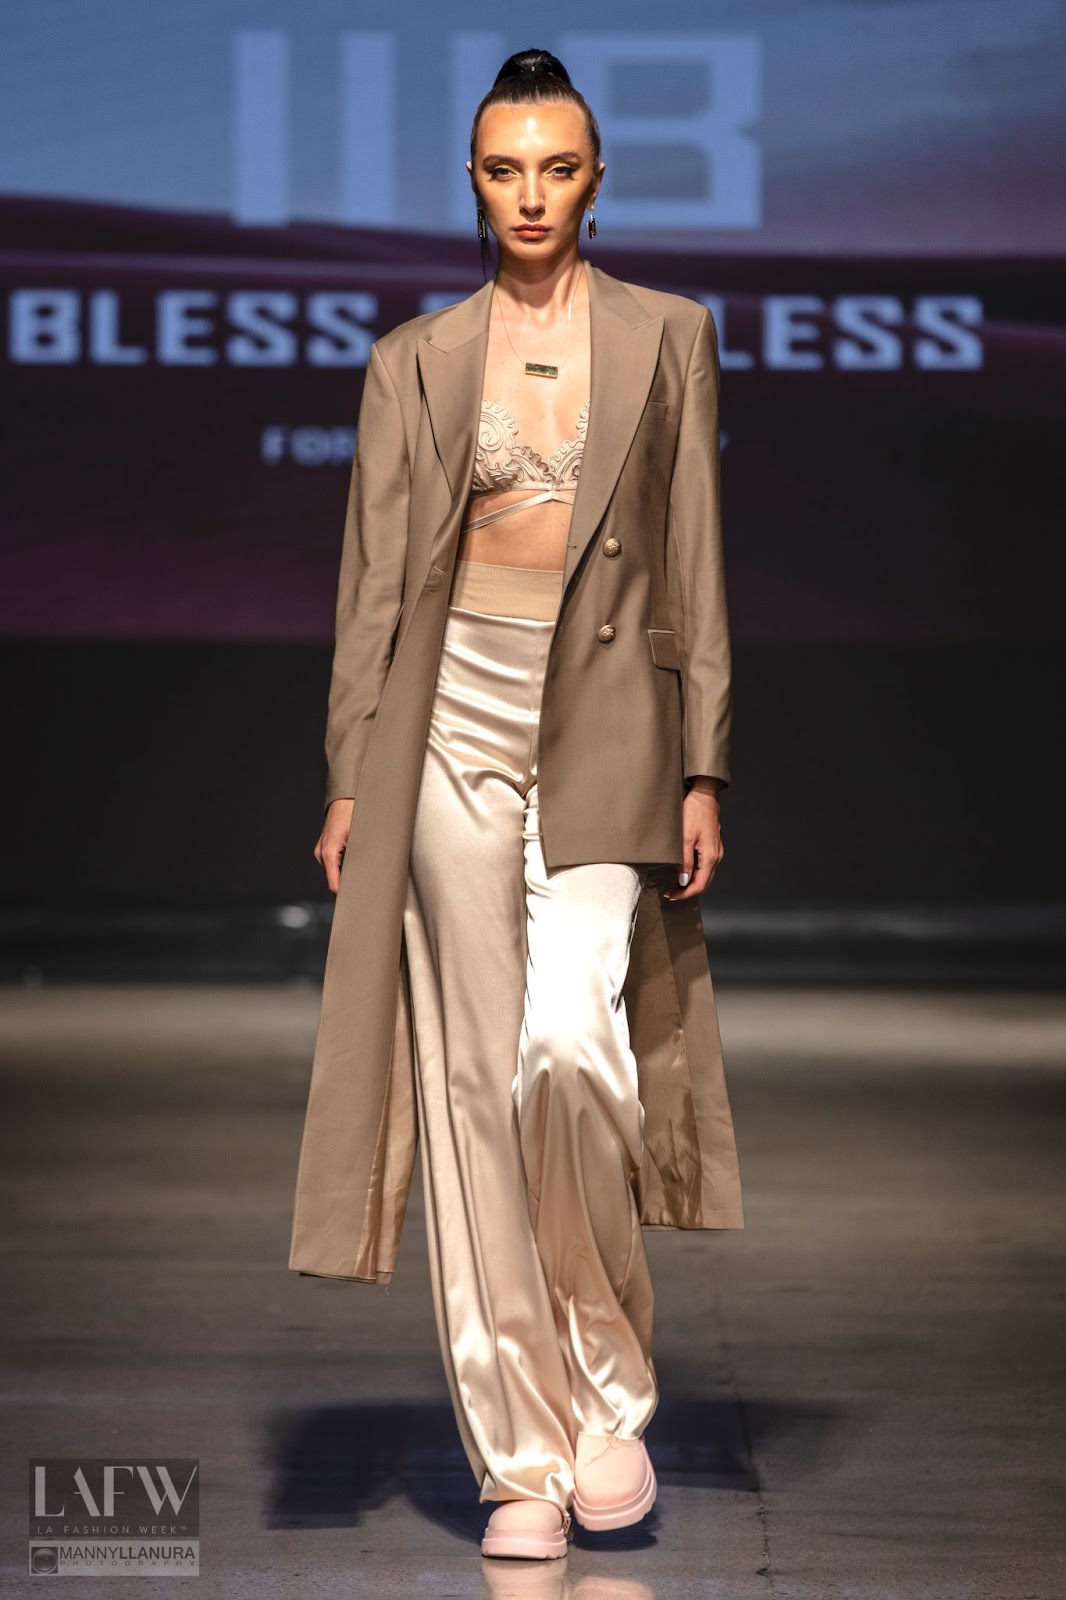 Bless By Bless (IIIB) is a hybrid of fashion and philanthropy